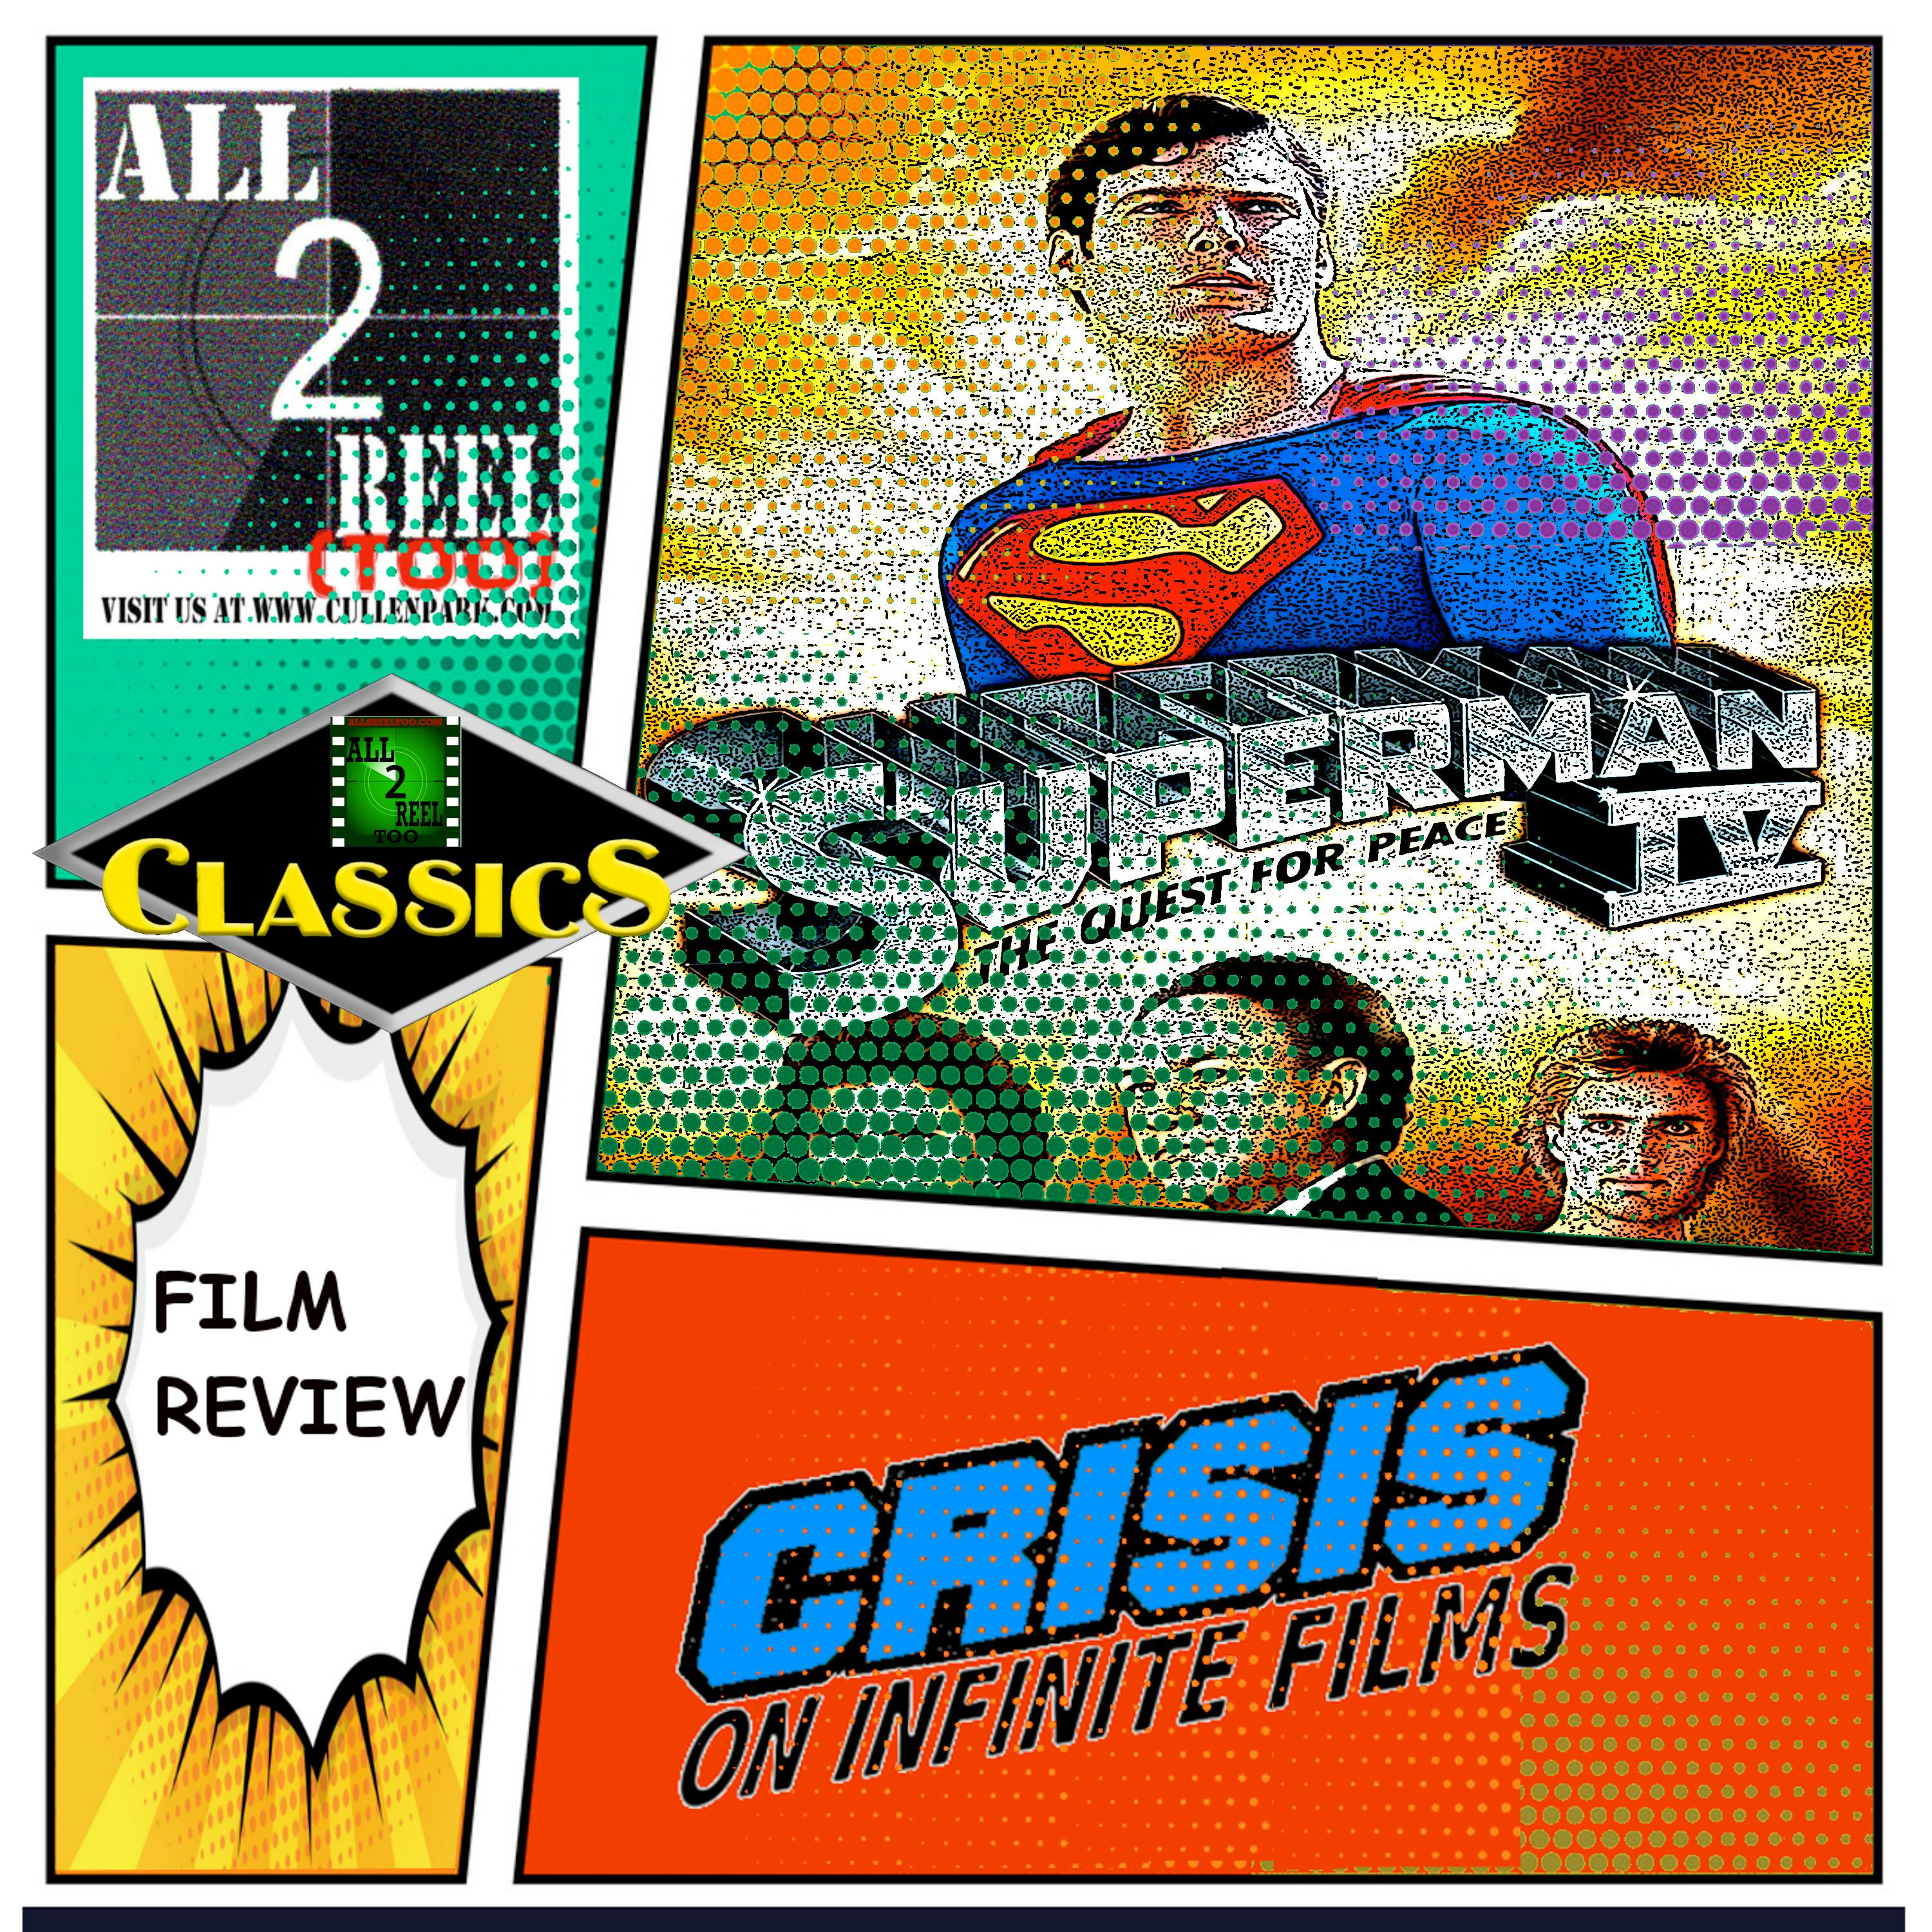 ALL2REELTOO CLASSICS - Superman IV: The Quest for Peace (1987) -Crisis On Infinite Films